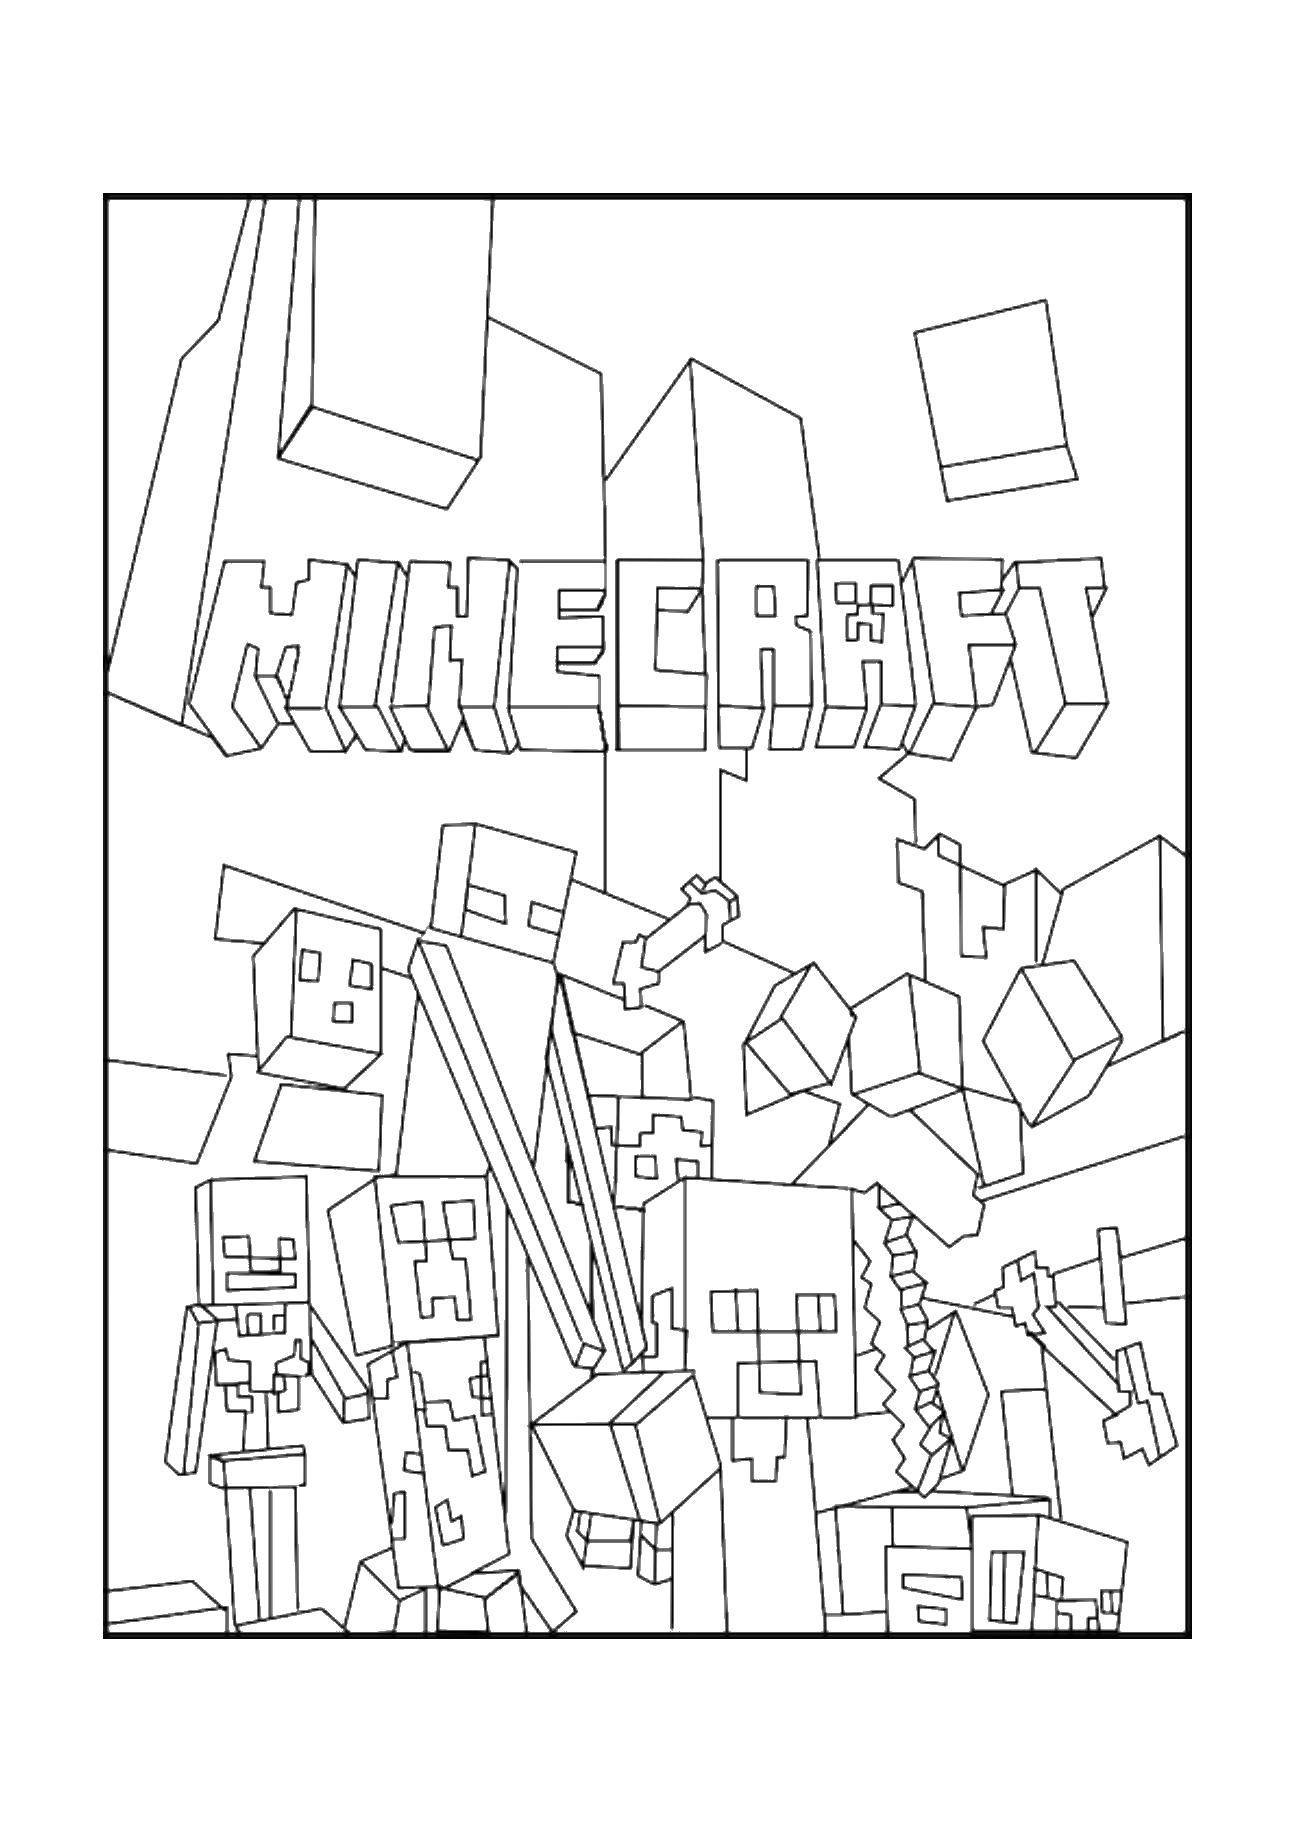 Coloring Minecraft warriors. Category minecraft. Tags:  minecraft, warrior.